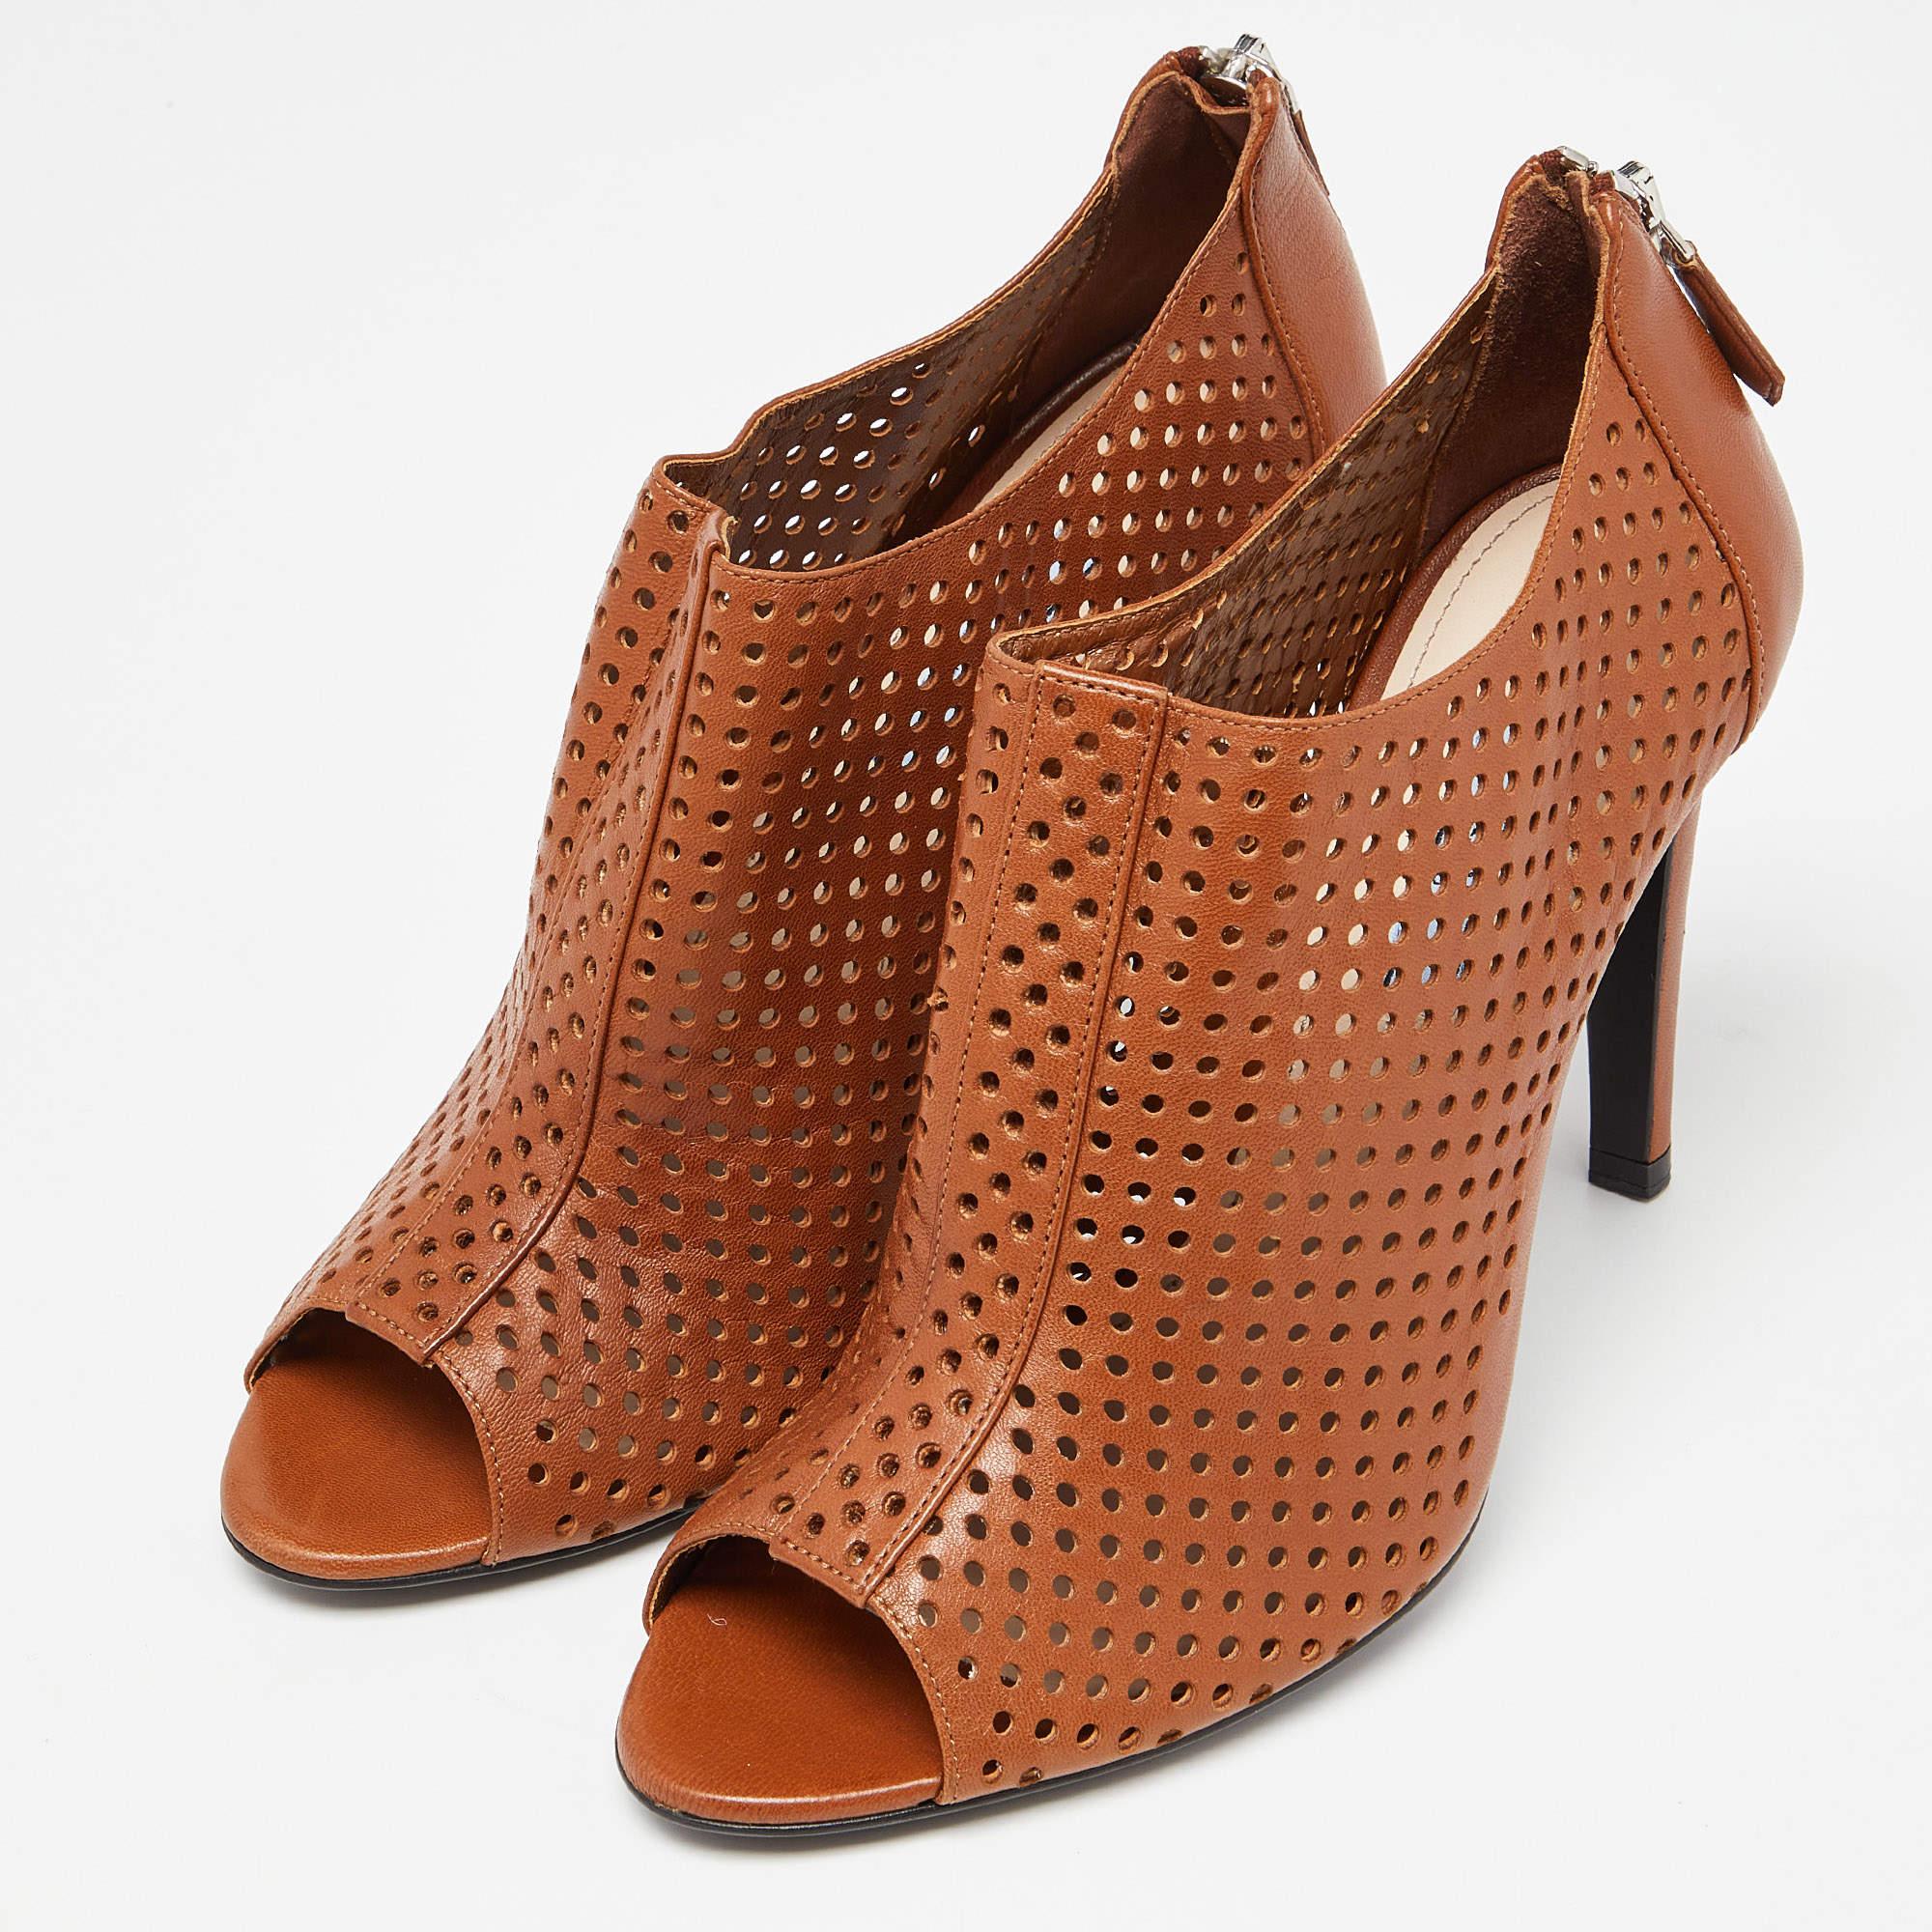 Enjoy the most fashionable days with these stylish booties. Modern in design and craftsmanship, they are fashioned to keep you comfortable and chic!

